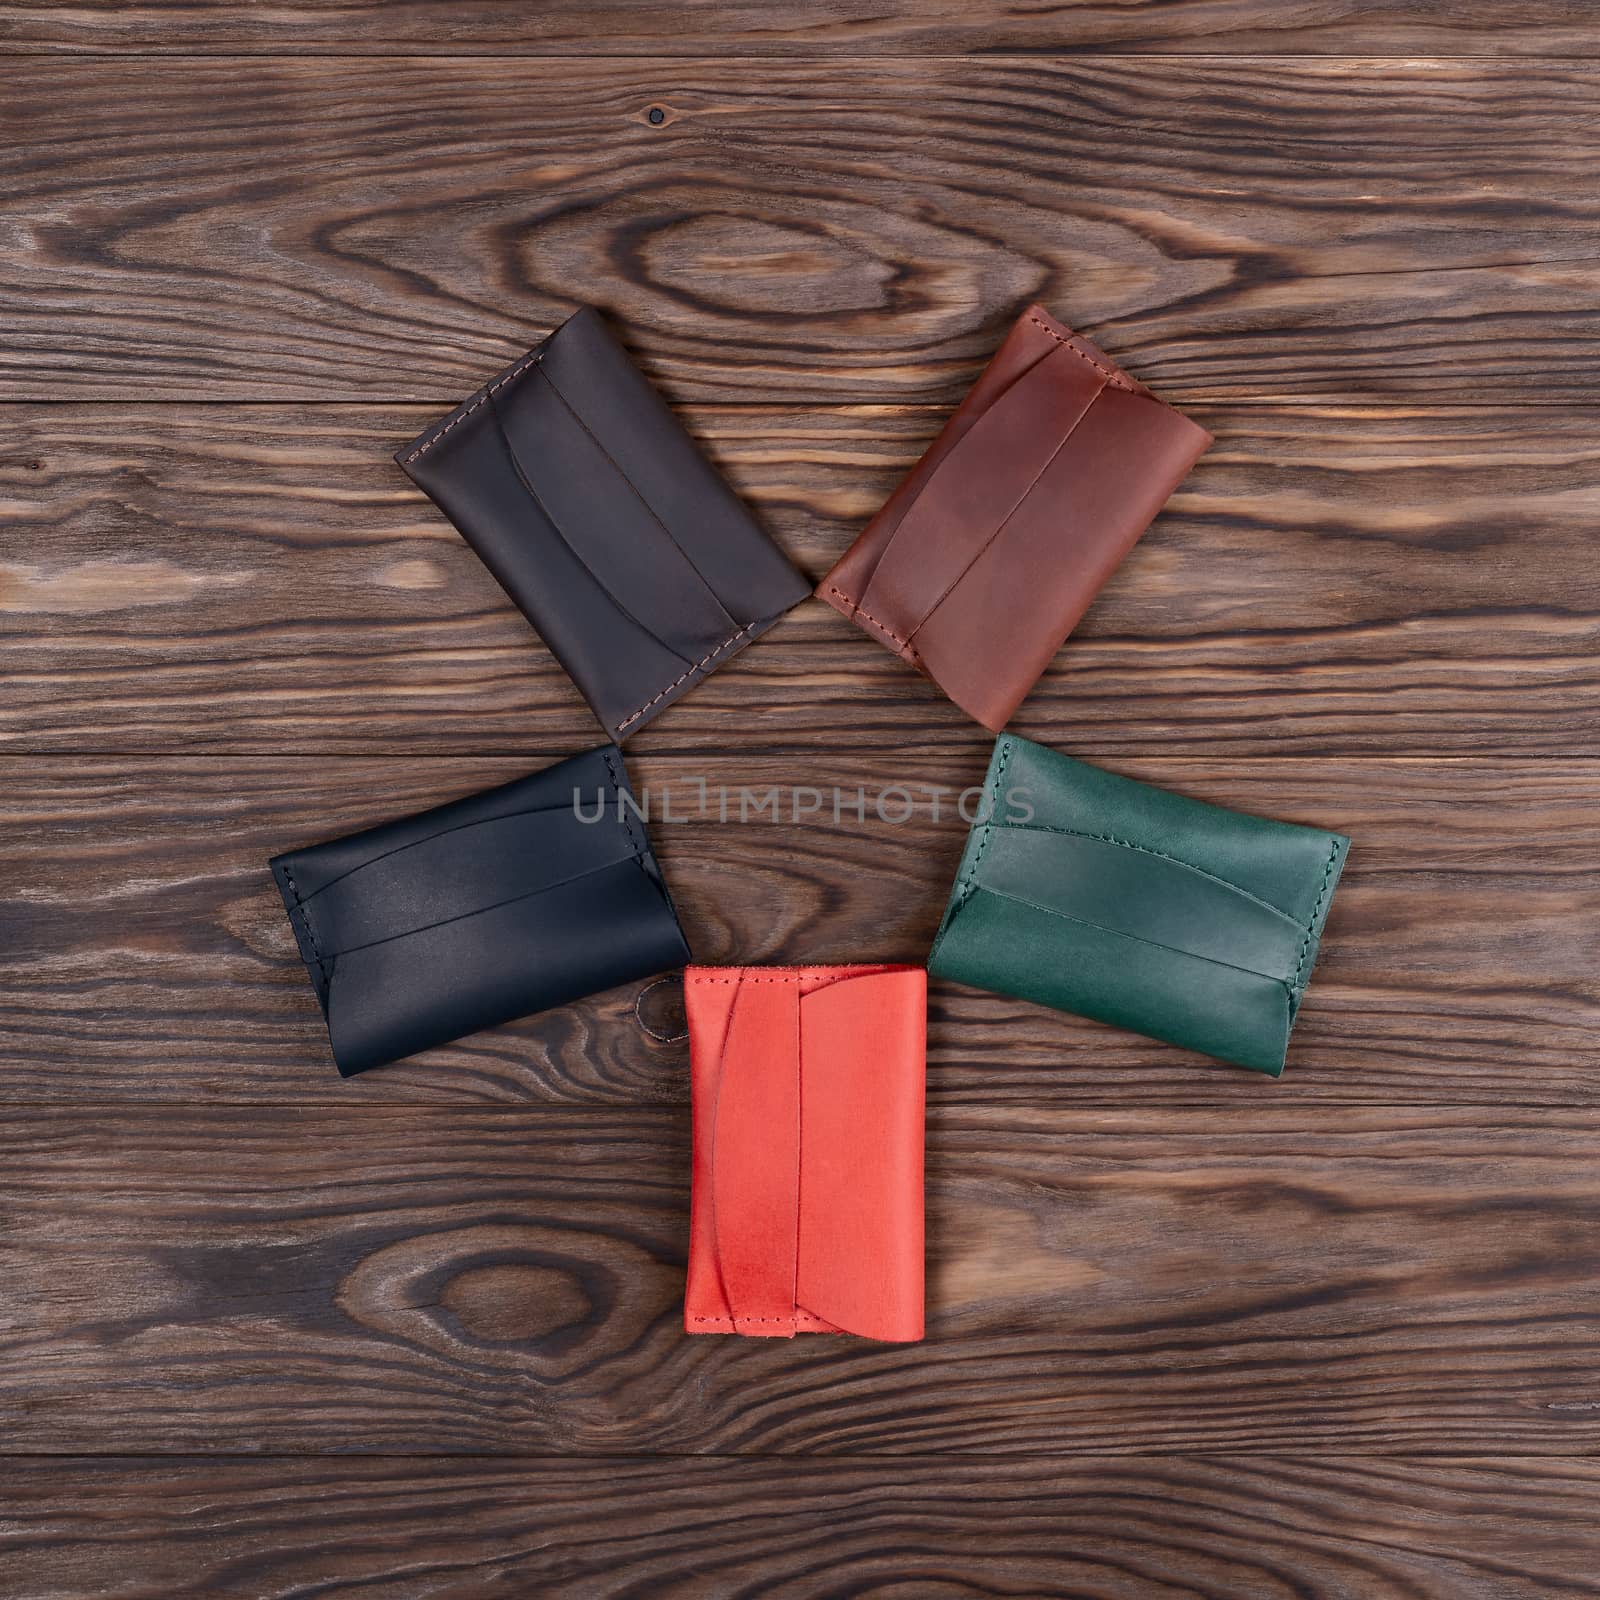 Flat lay photo of five different colour handmade leather one pocket cardholders. Red, black, blown, ginger and green colors. Stock photo on wooden background.